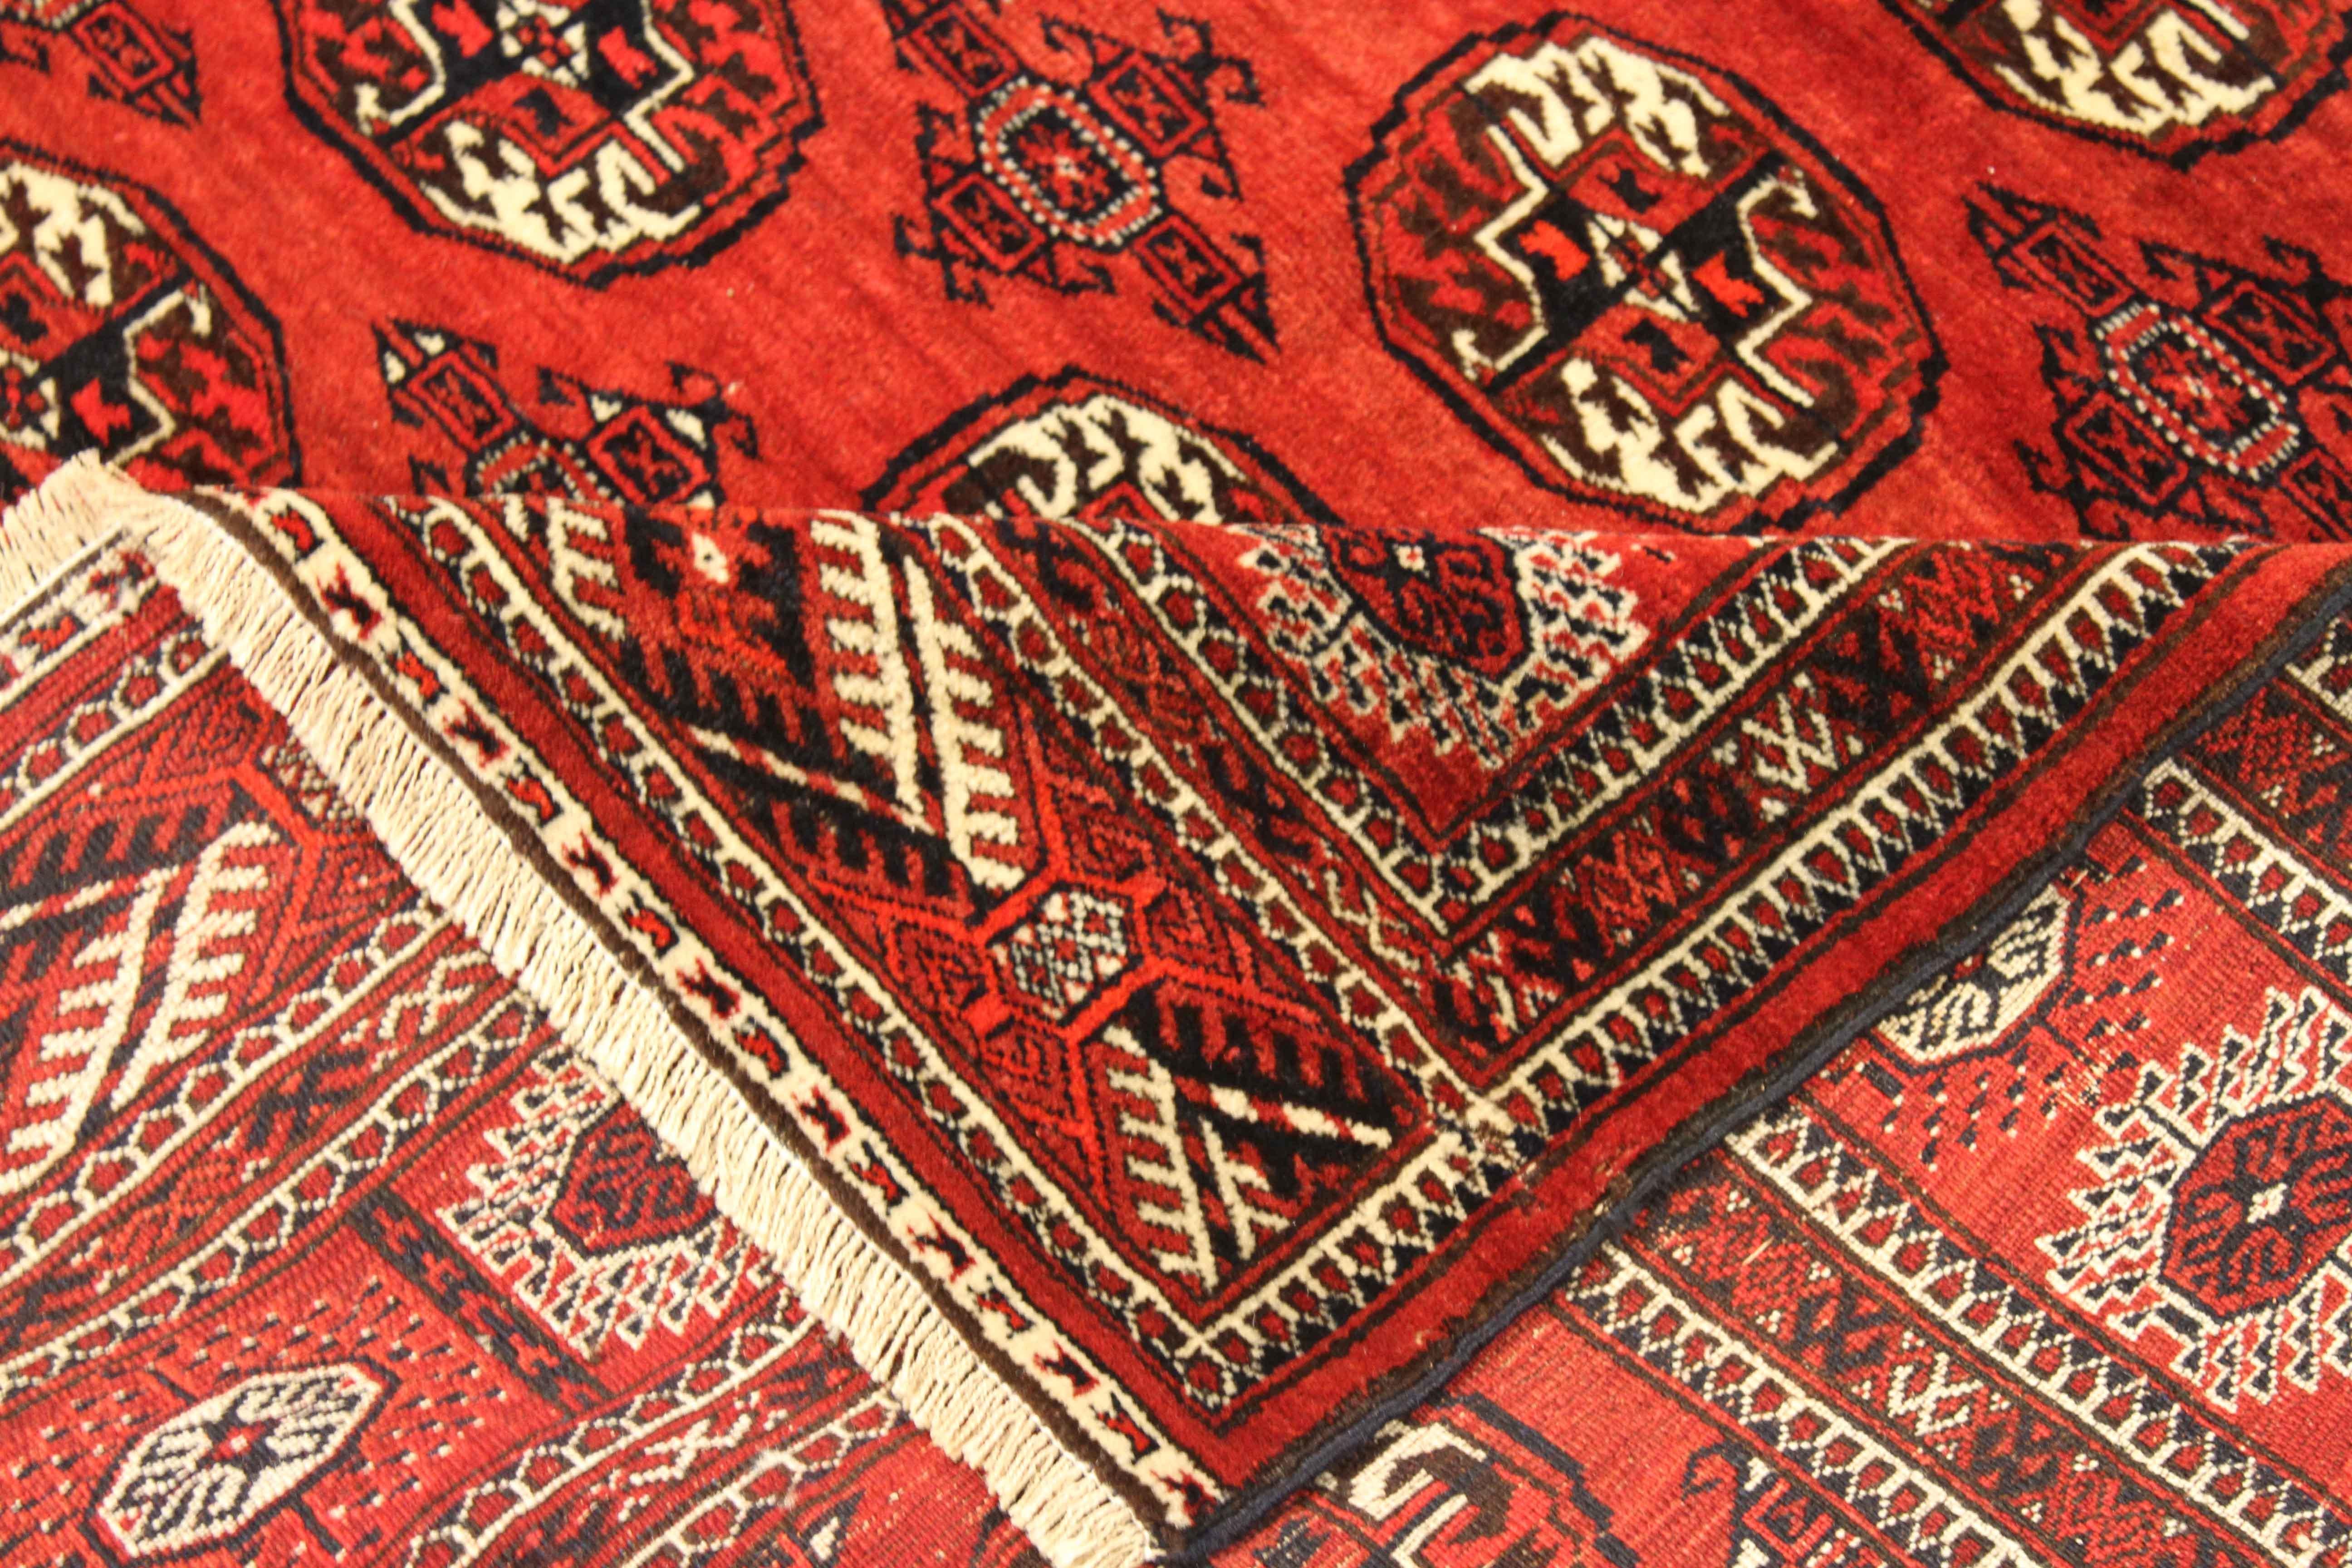 New Persian rug handwoven from the finest sheep’s wool and colored with all-natural vegetable dyes that are safe for humans and pets. It’s a traditional Turkmen design featuring ‘Gul’ or rose-like details in black and ivory over a deep red field. It